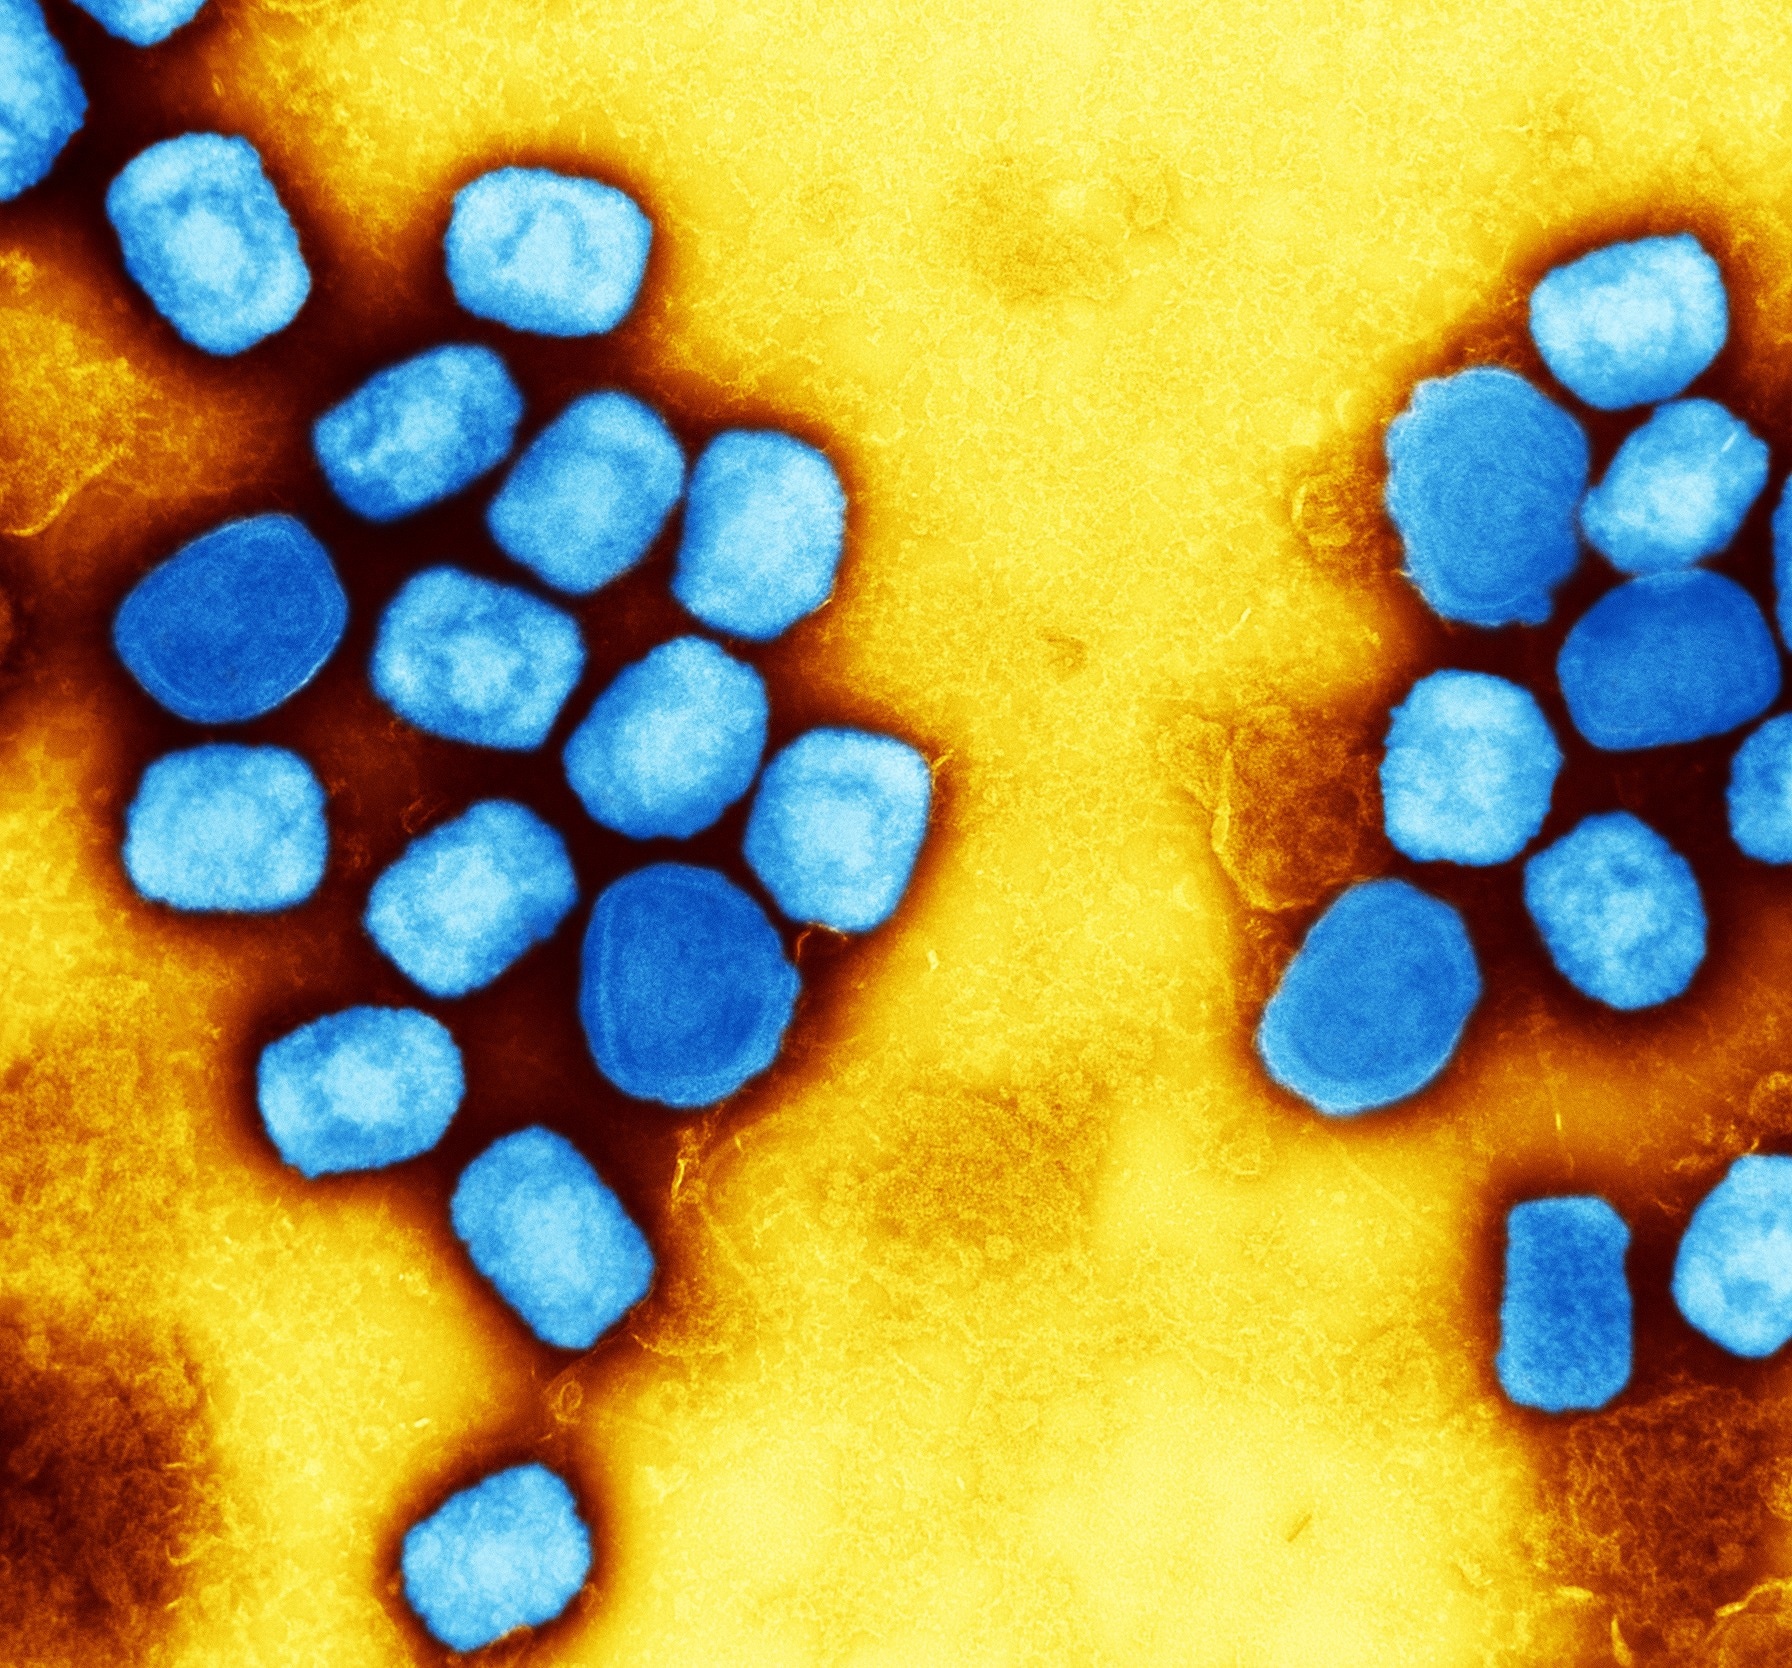 Colored transmission electron micrograph of monkeypox virus particles (blue) grown and purified from cell culture.  Image captured at NIAID's Integrated Research Facility (IRF) at Fort Detrick, Maryland.  Credit: NIAID